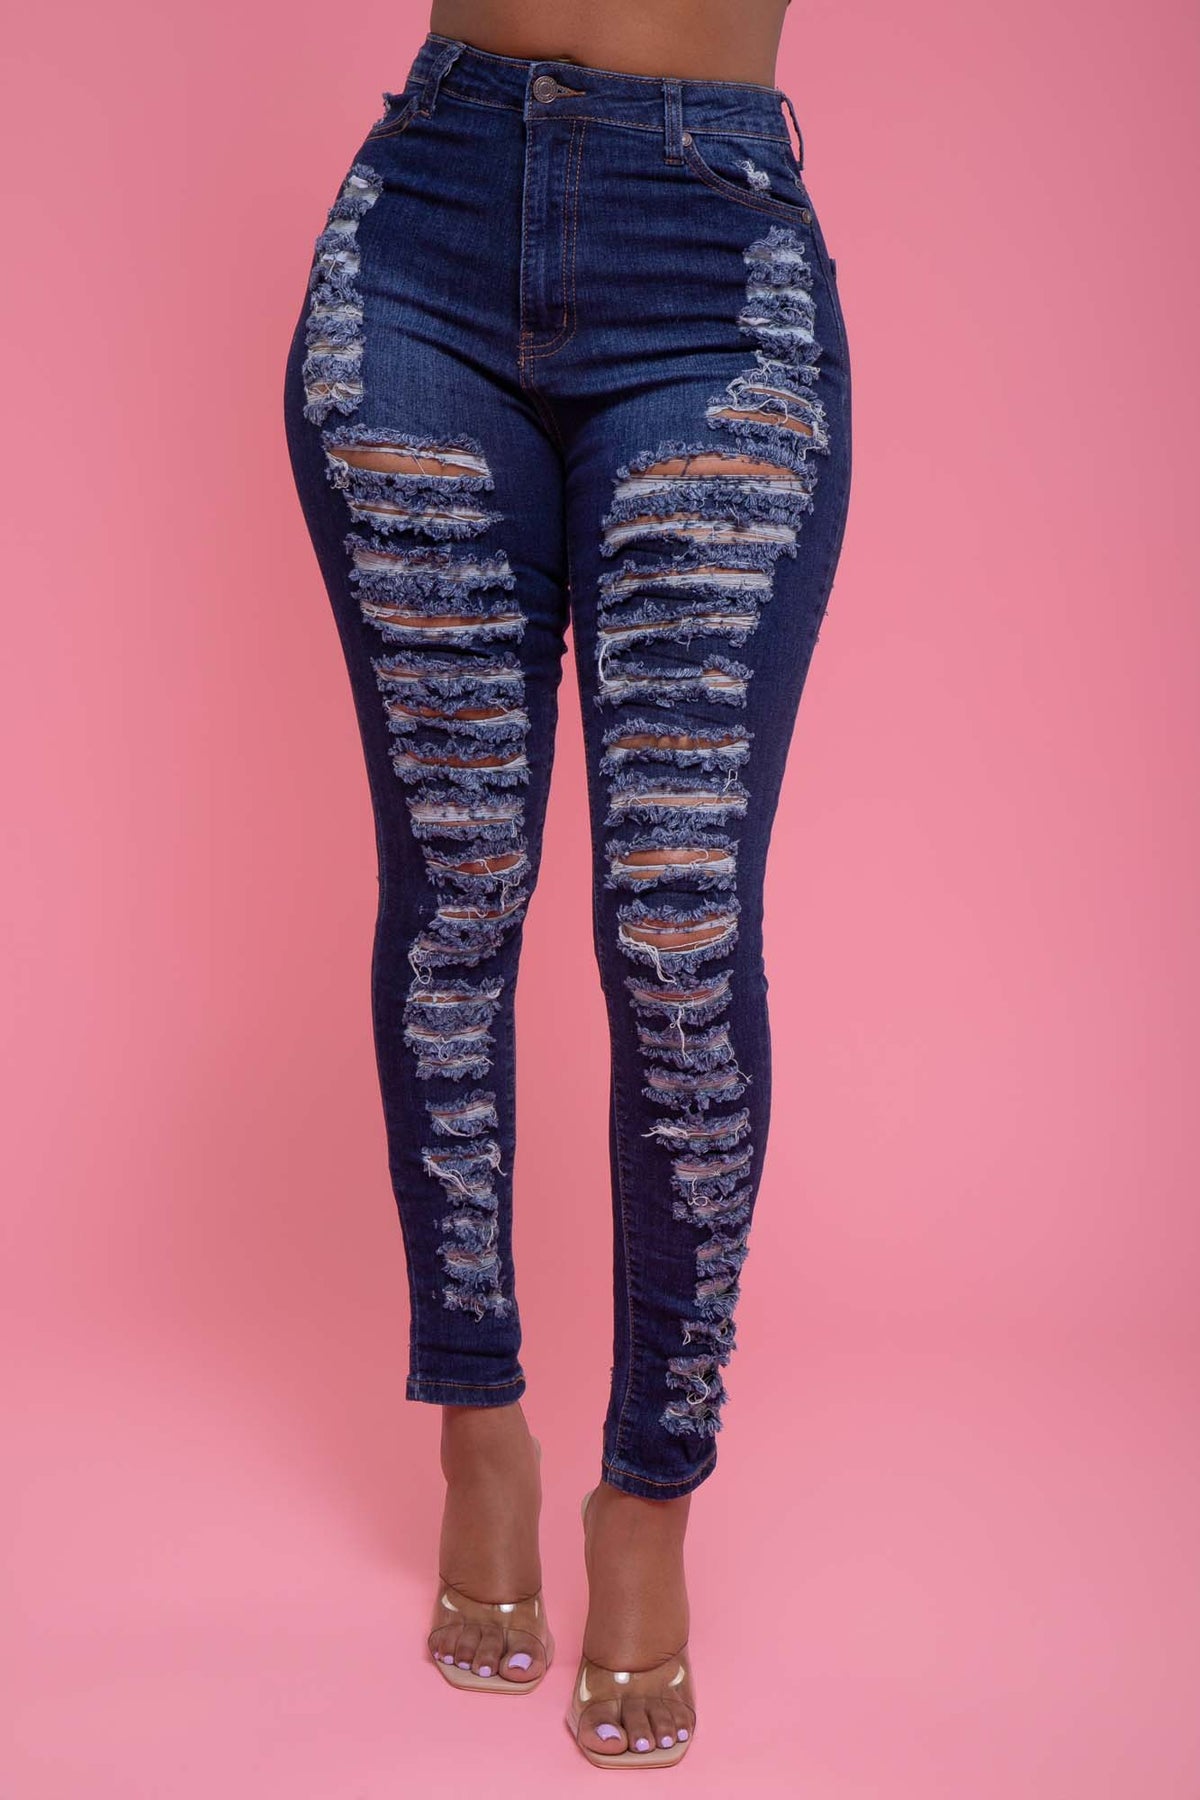 
              Down For You Hourglass High Rise Distressed Stretchy Jeans - Dark Wash - Swank A Posh
            